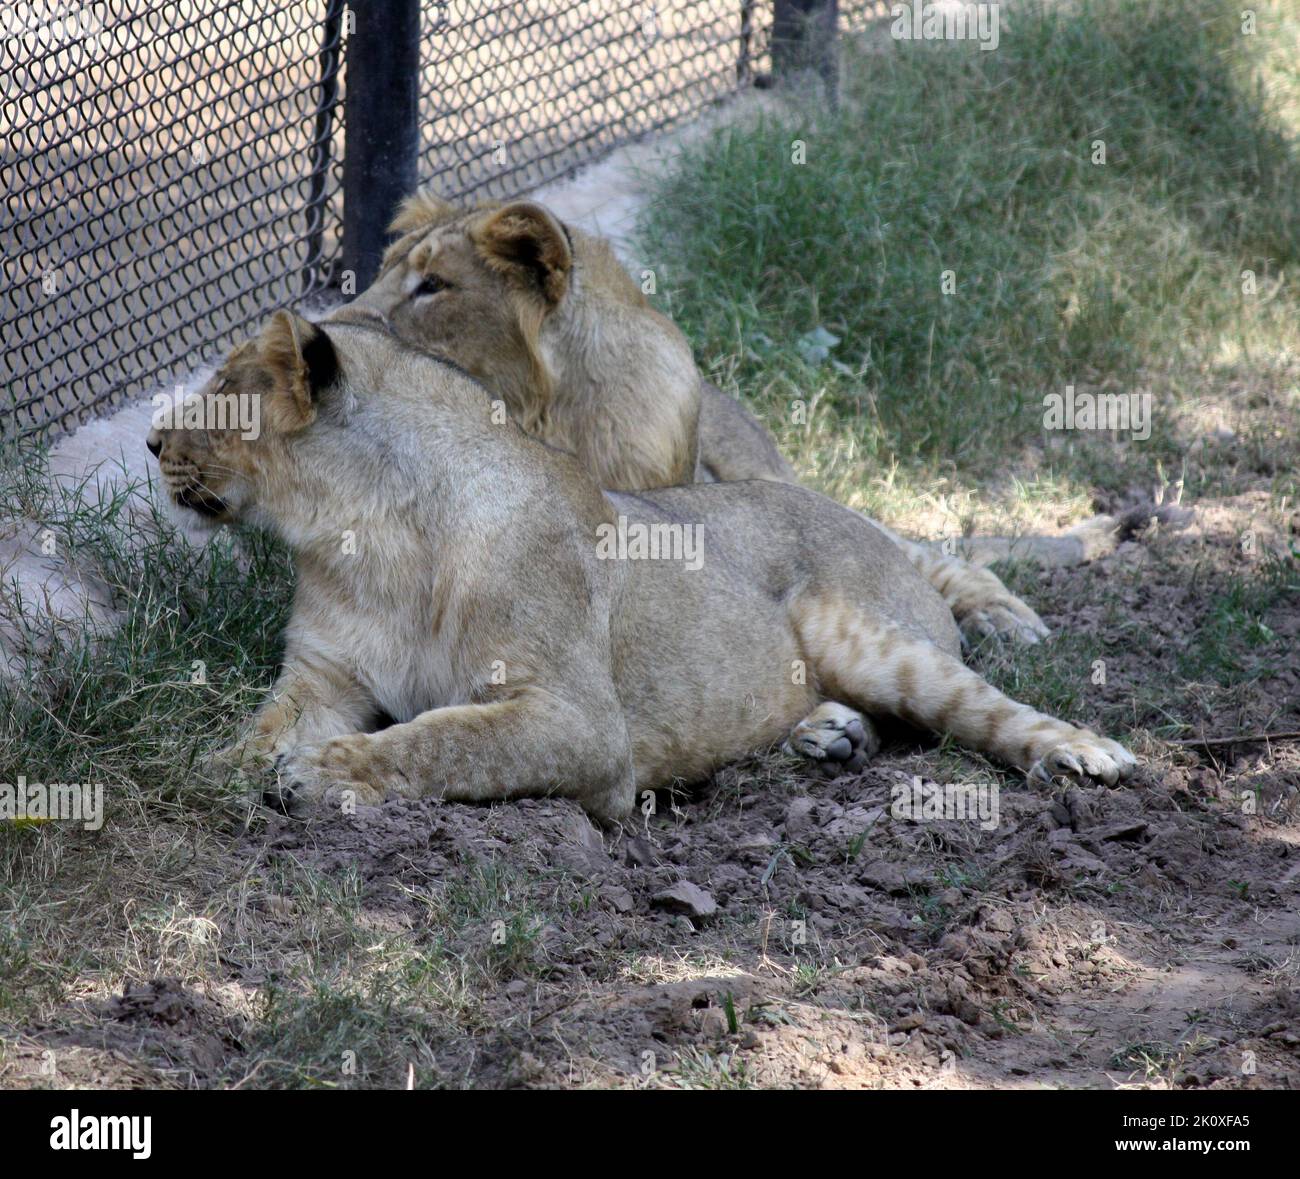 Subadult Asiatic Lions (Panthera leo leo) waiting for food in a zoo : (pix SShukla) Stock Photo